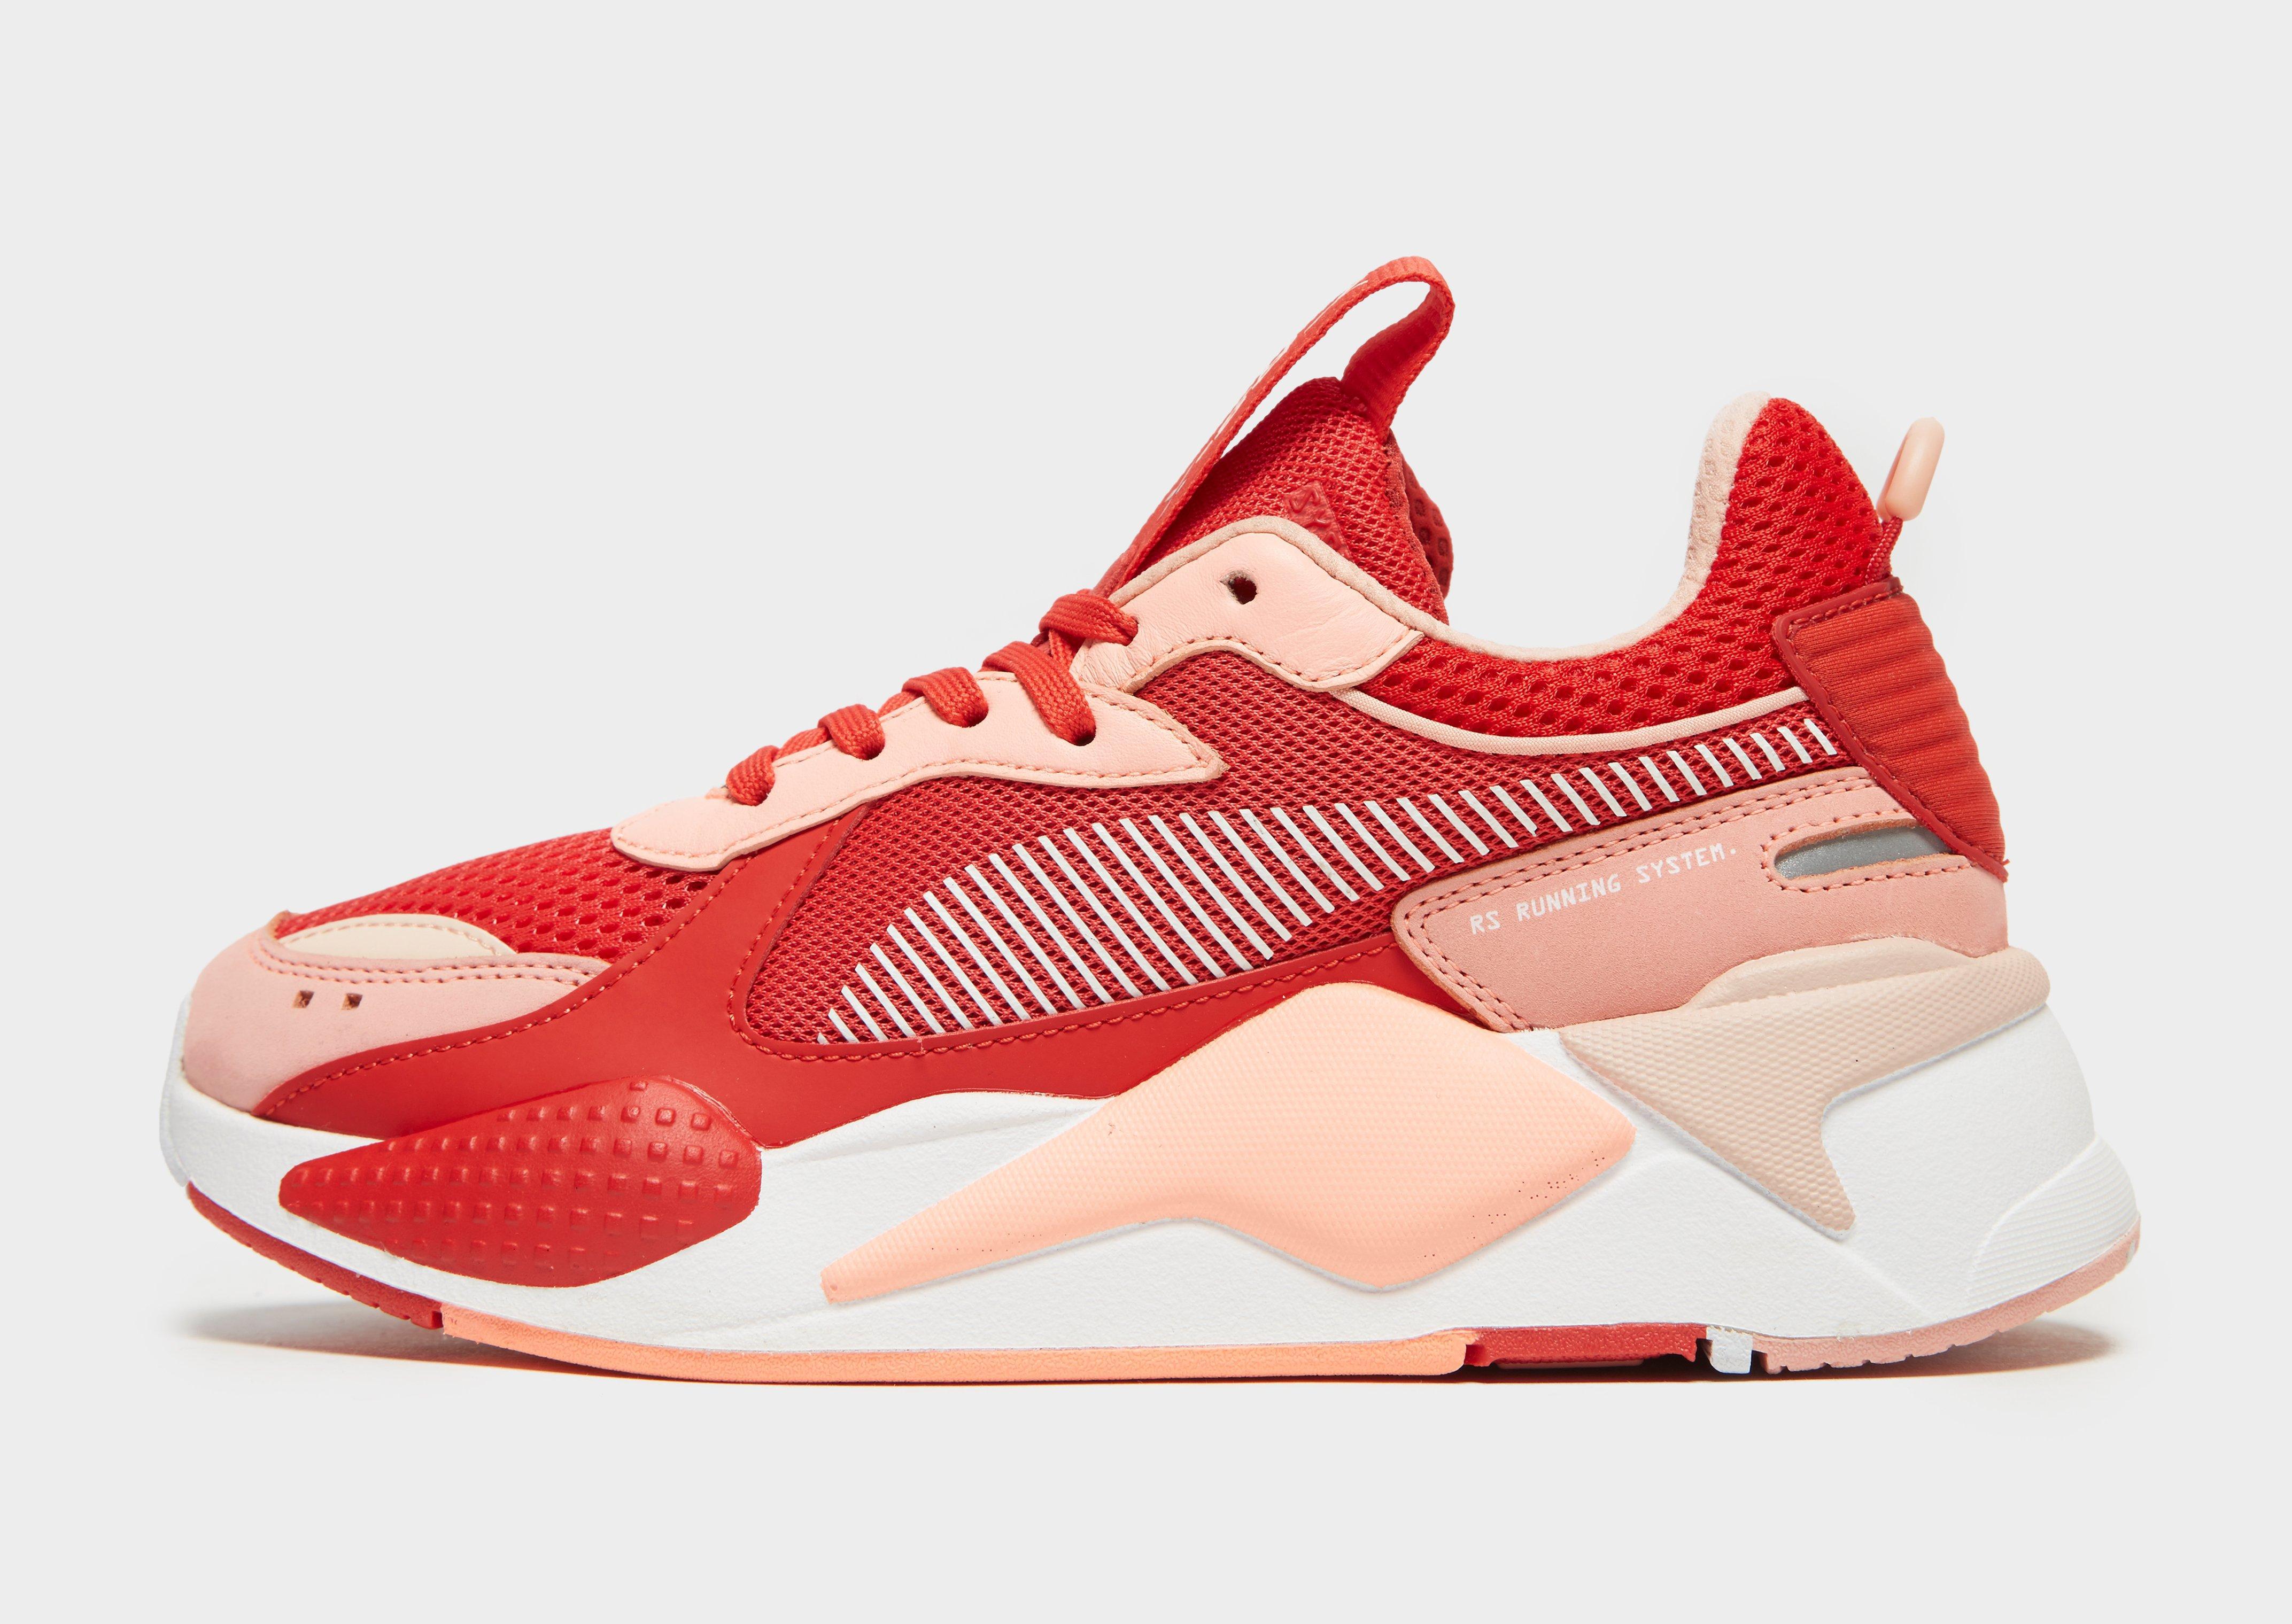 PUMA Rubber Rs-x Toys in Red/Pink (Red 